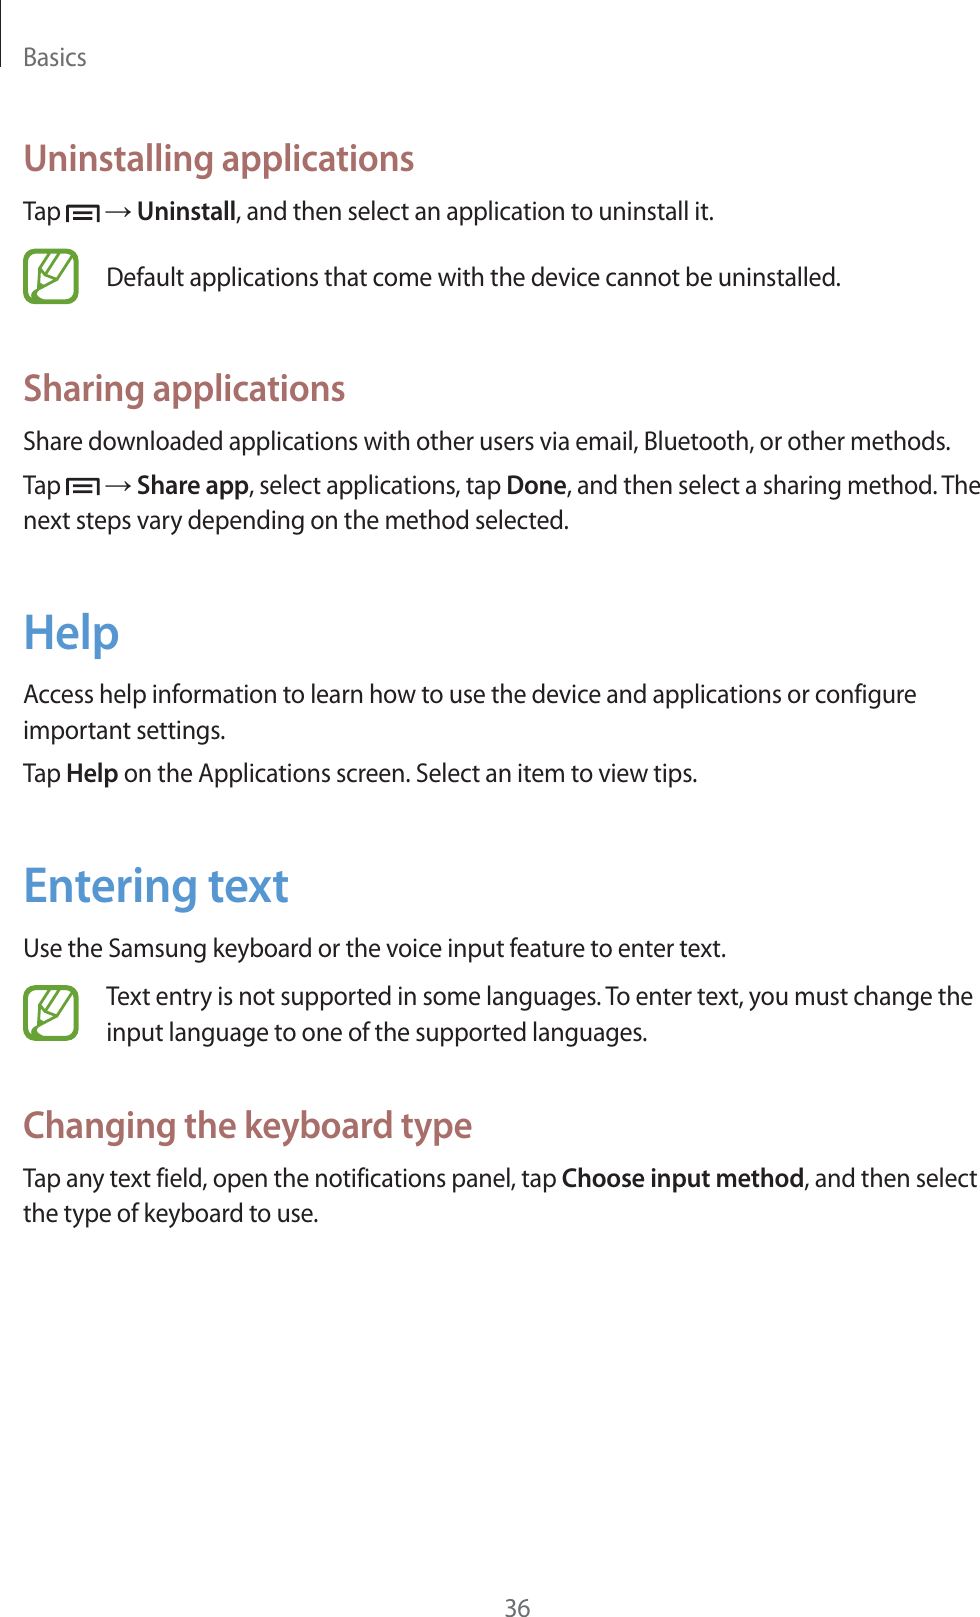 Basics36Uninstalling applicationsTap   ĺ Uninstall, and then select an application to uninstall it.Default applications that come with the device cannot be uninstalled.Sharing applicationsShare downloaded applications with other users via email, Bluetooth, or other methods.Tap   ĺ Share app, select applications, tap Done, and then select a sharing method. The next steps vary depending on the method selected.HelpAccess help information to learn how to use the device and applications or configure important settings.Tap Help on the Applications screen. Select an item to view tips.Entering textUse the Samsung keyboard or the voice input feature to enter text.Text entry is not supported in some languages. To enter text, you must change the input language to one of the supported languages.Changing the keyboard typeTap any text field, open the notifications panel, tap Choose input method, and then select the type of keyboard to use.